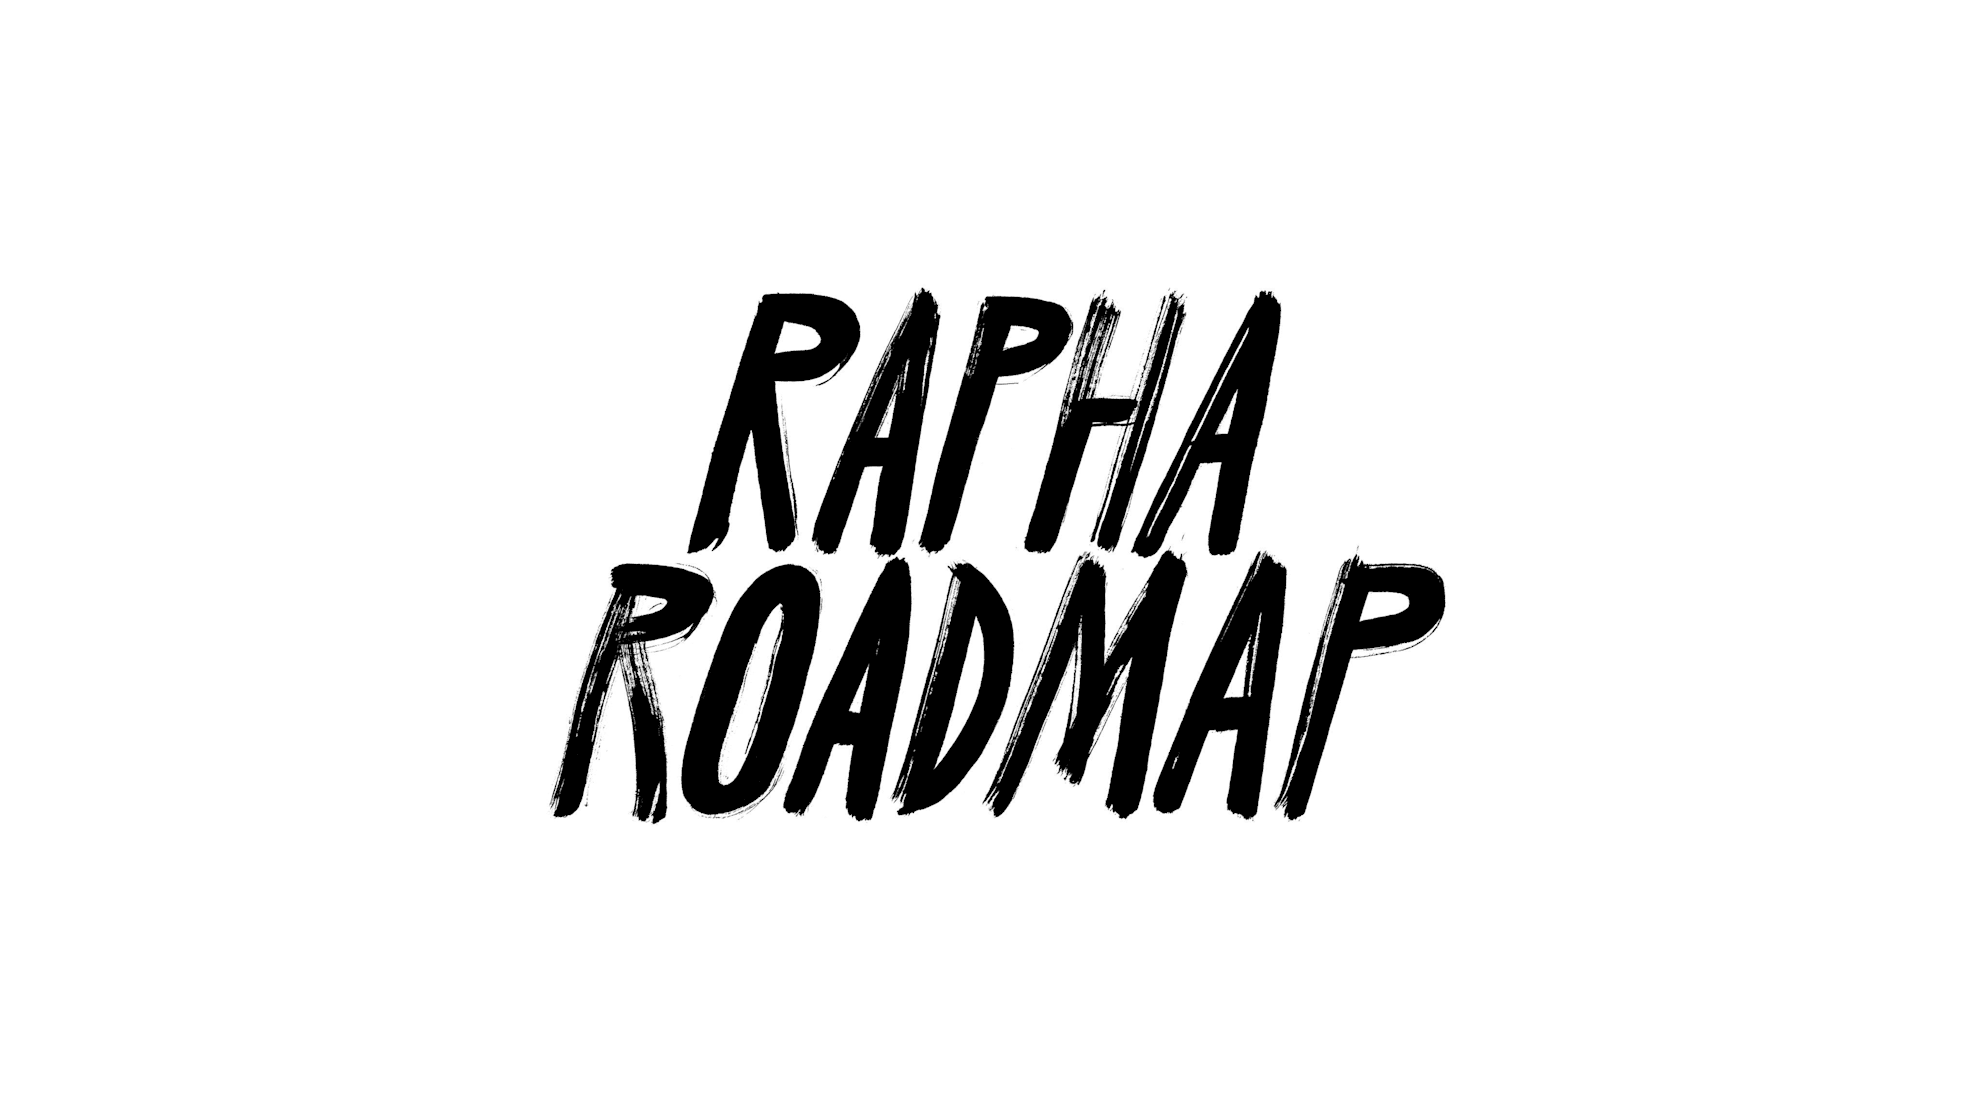 The Rapha Roadmap: Part One